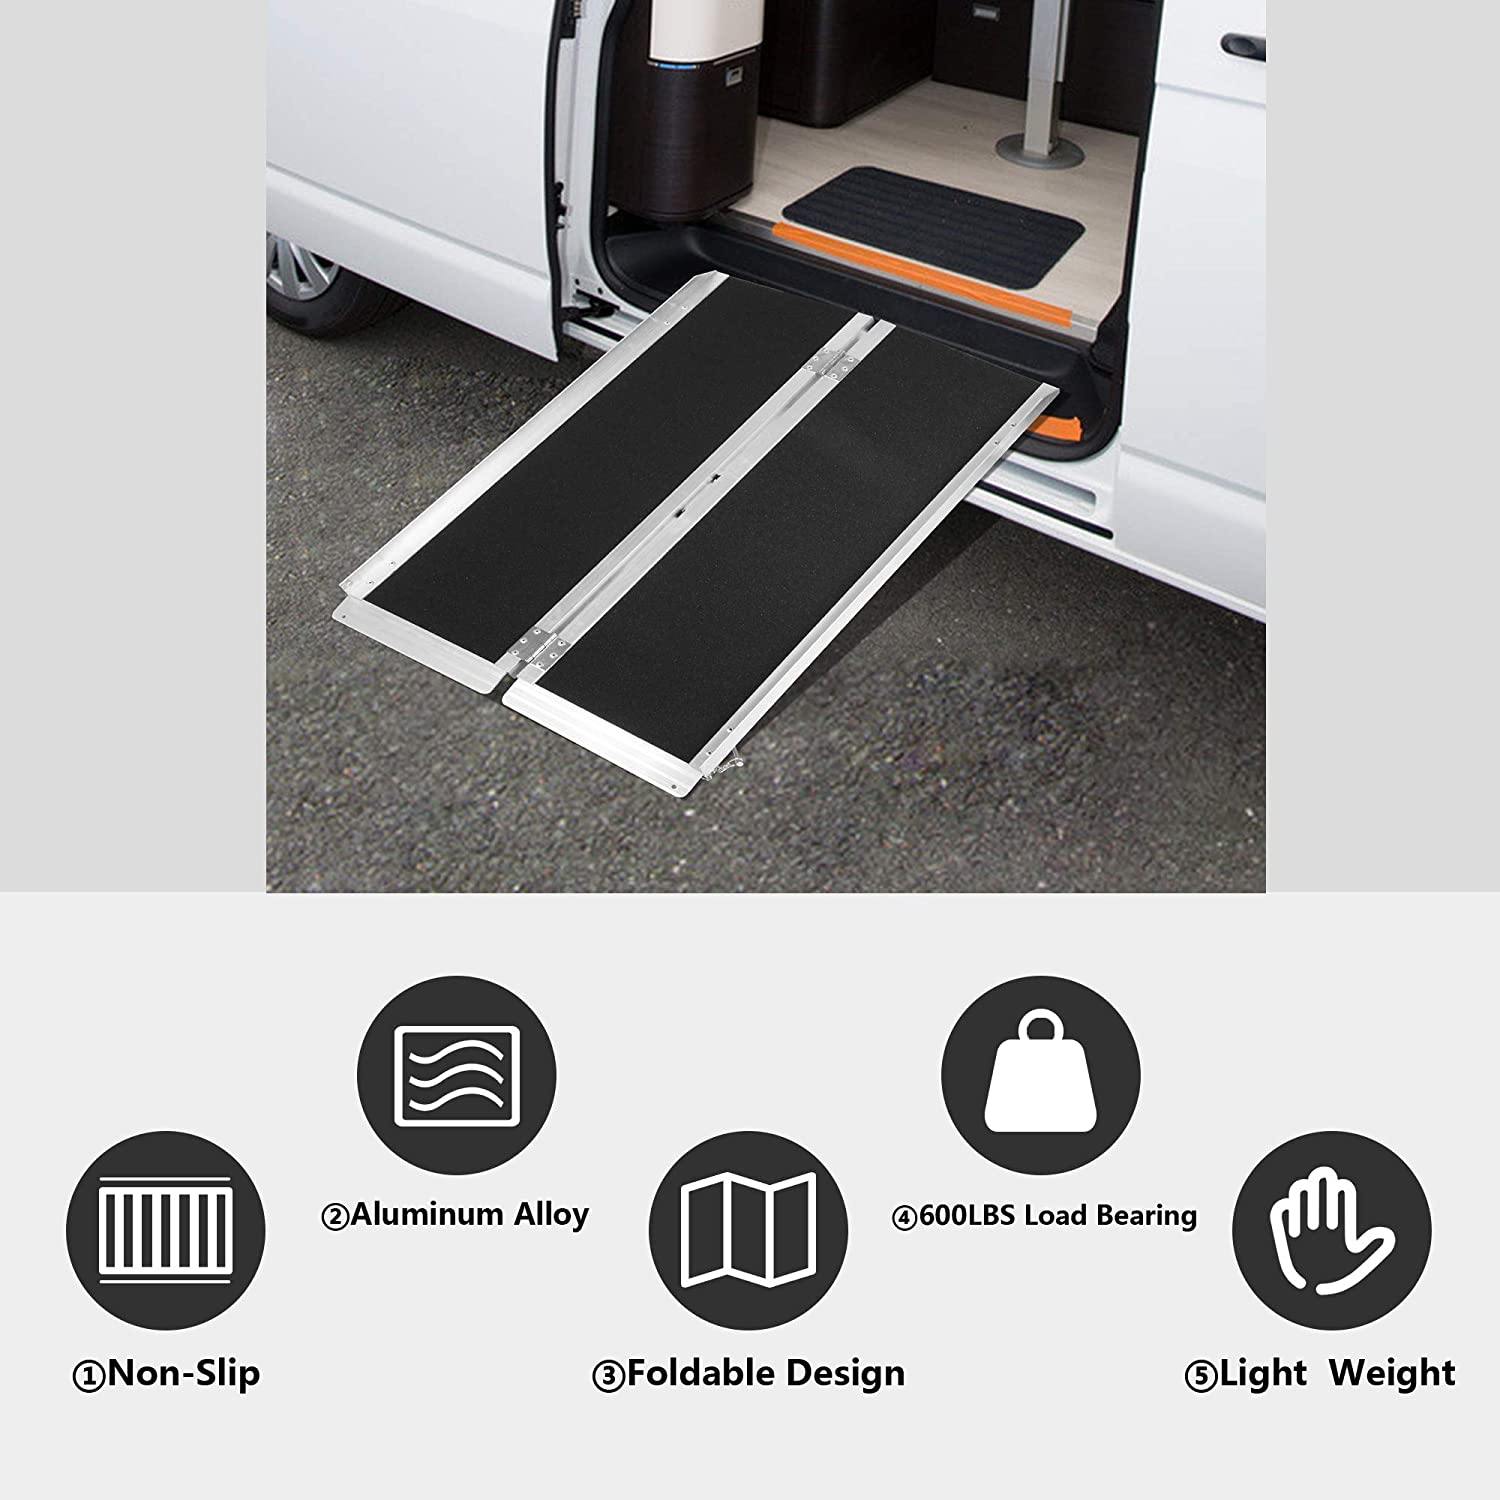 3ft Wheelchair Ramp (20LBS), Aluminum Alloy Ramp, Single Fold Portable Handles & Anti-Slip Carpet for Doorways, Stairs, Mobility Scooter, Porch - Bosonshop